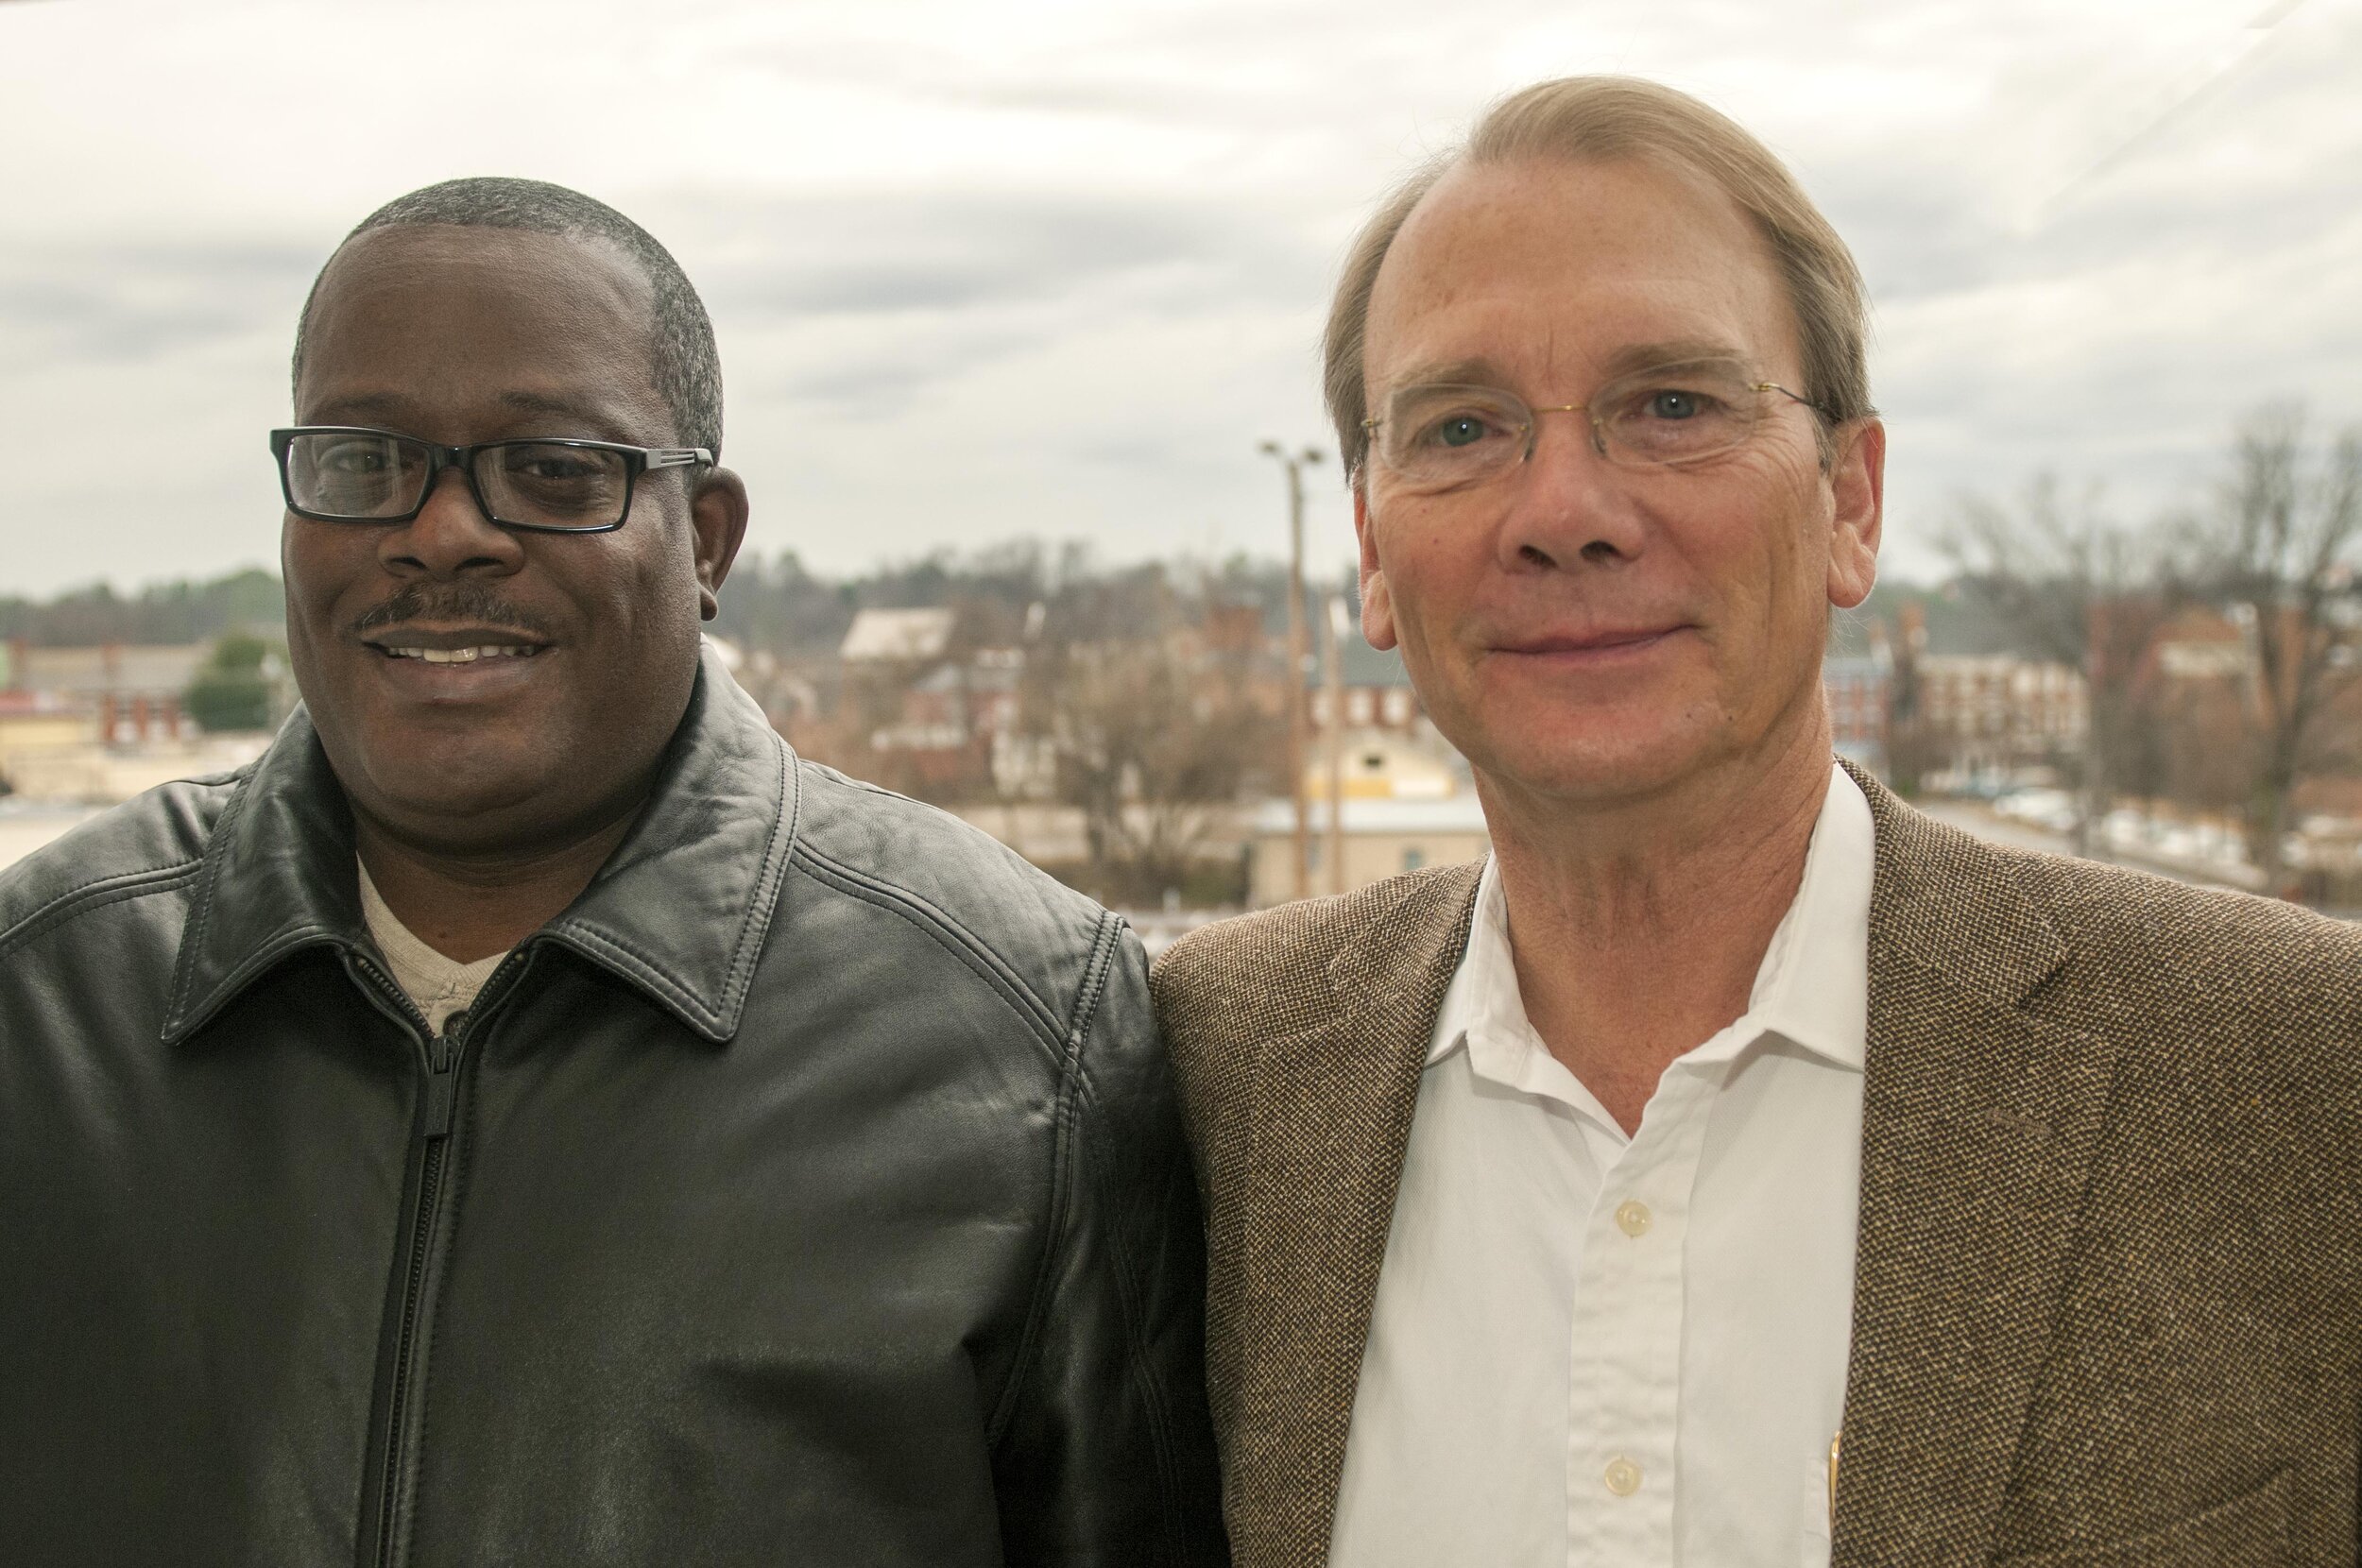  Dale with his client and friend, Tyrone Henderson 